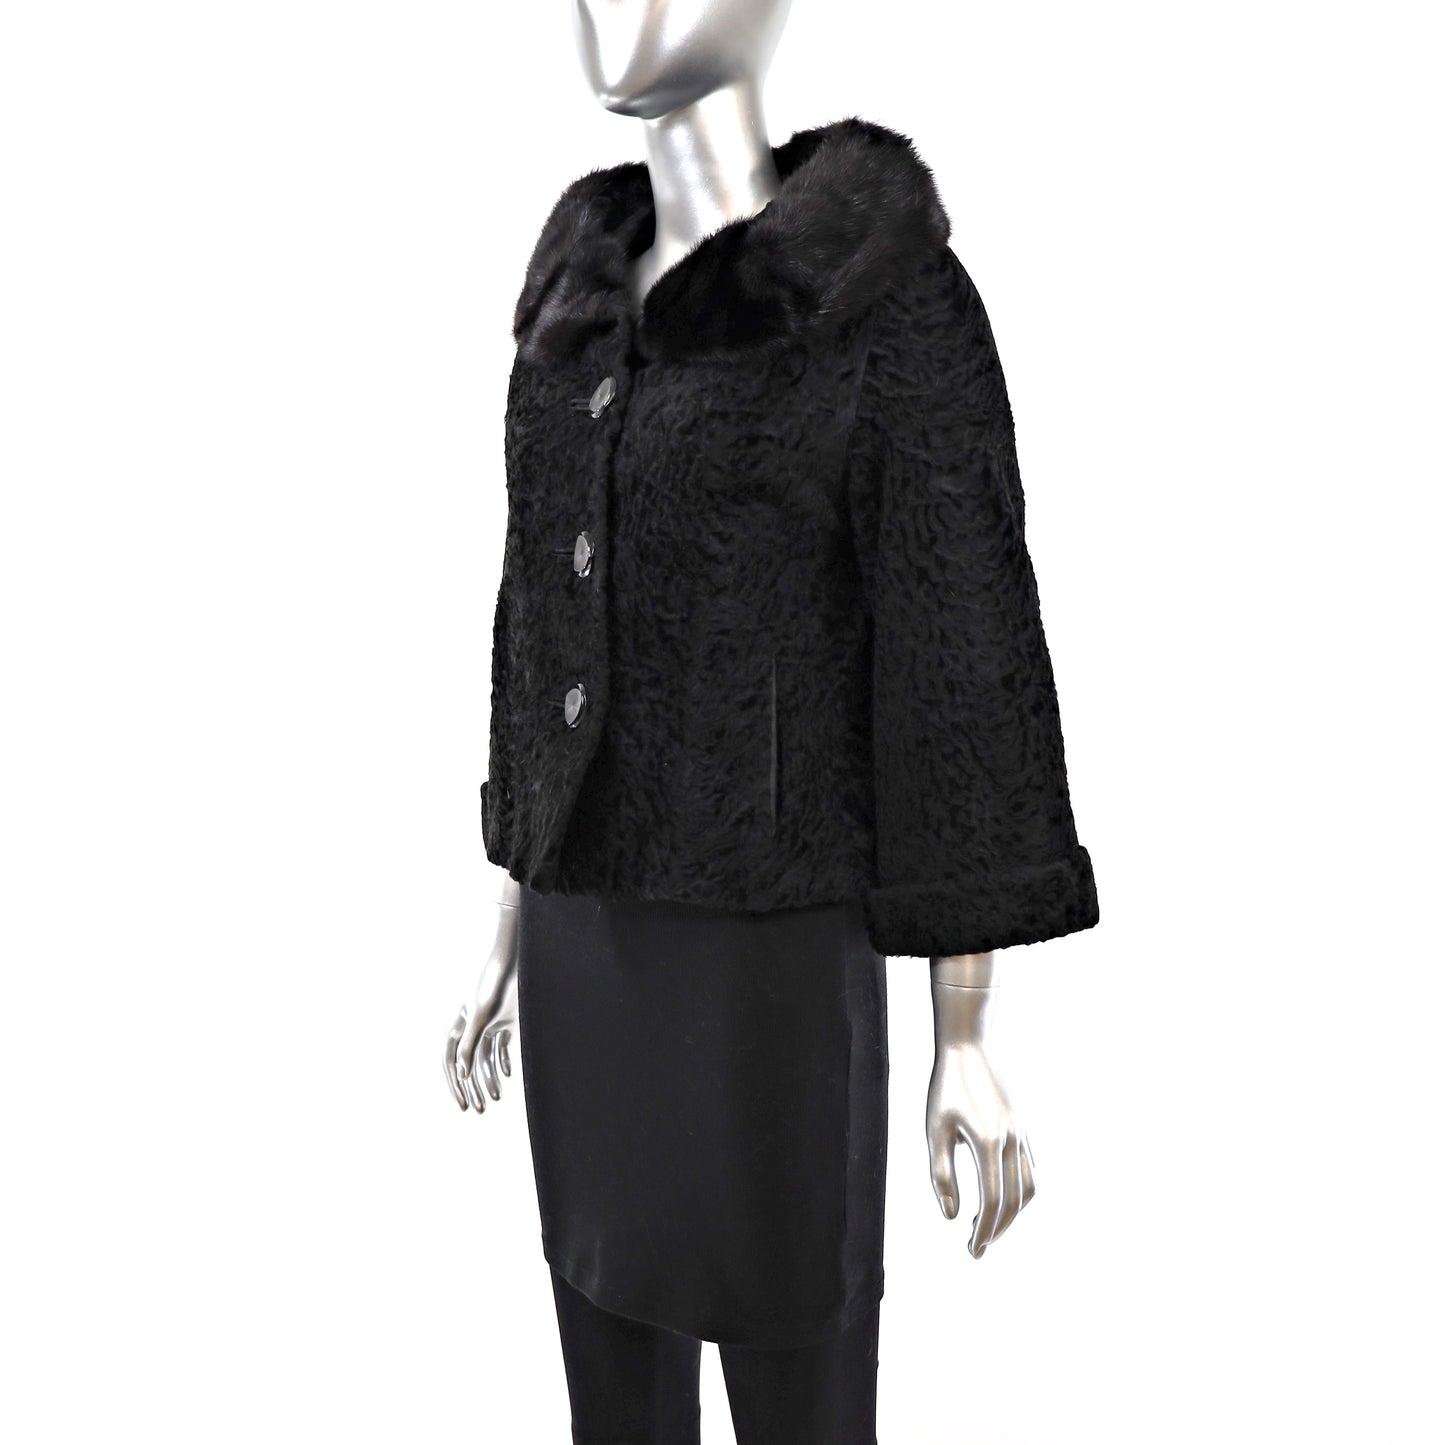 Broadtail Jacket with Mink Collar- Size M